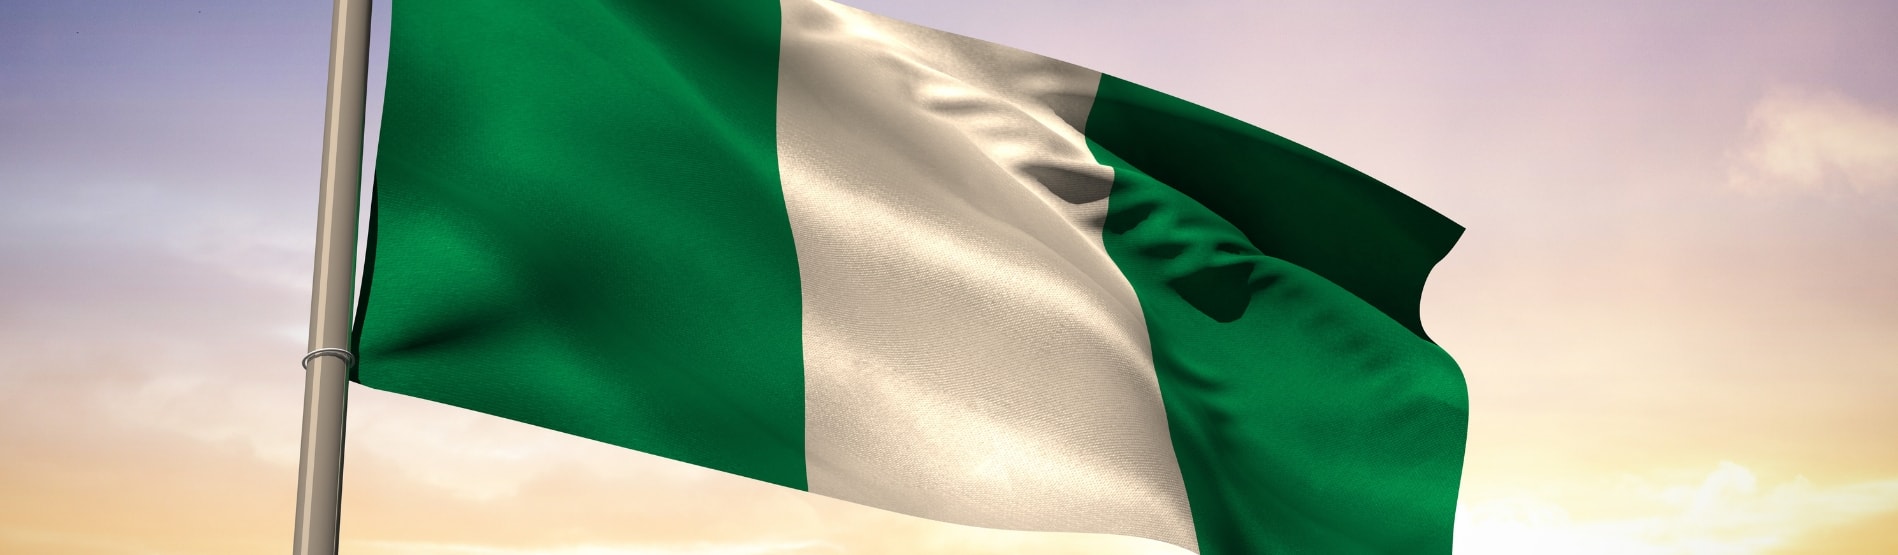 Nigerian Flag blowing in the breeze.